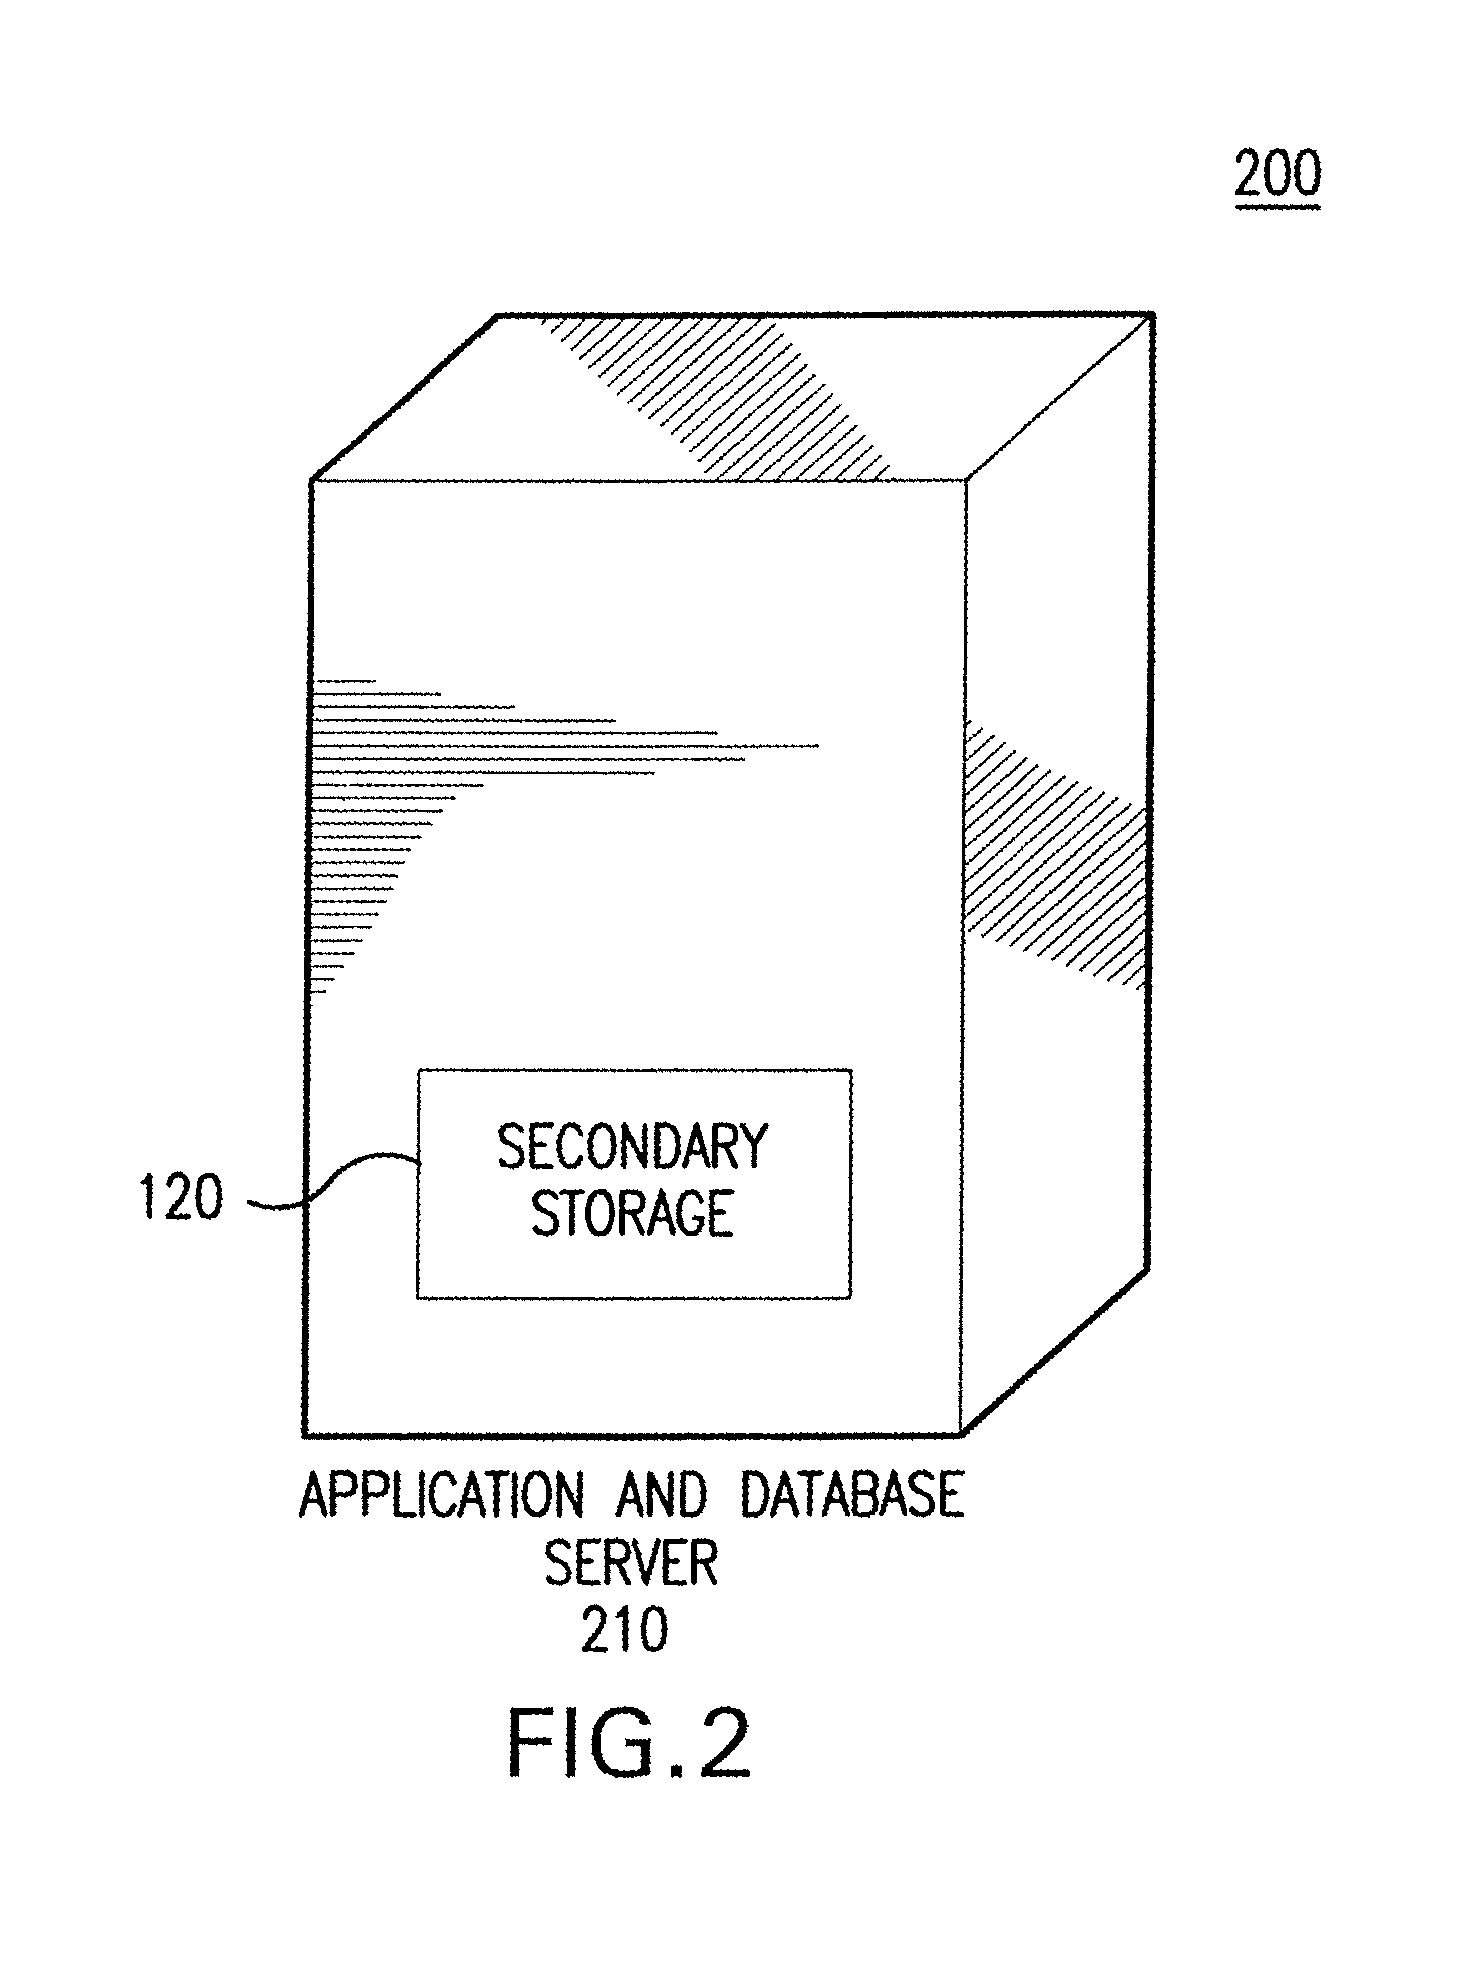 Multi-writer in-memory non-copying database (MIND) system and method